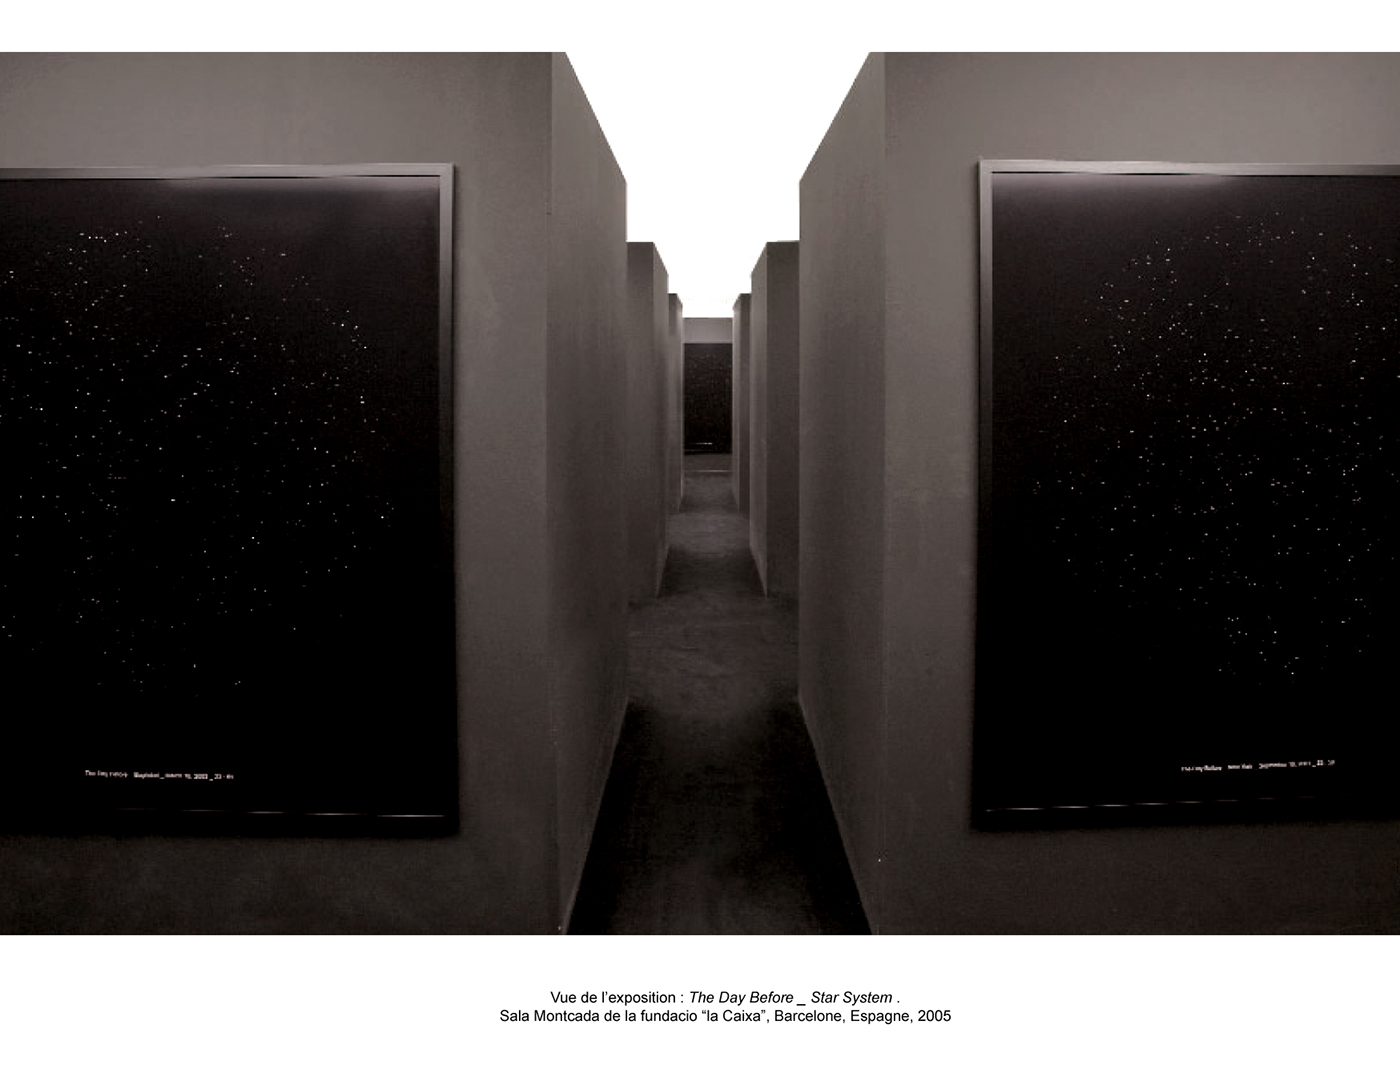 Renaud Auguste-Dormeuil - The Day Before_Star System (Hiroshima), 2004